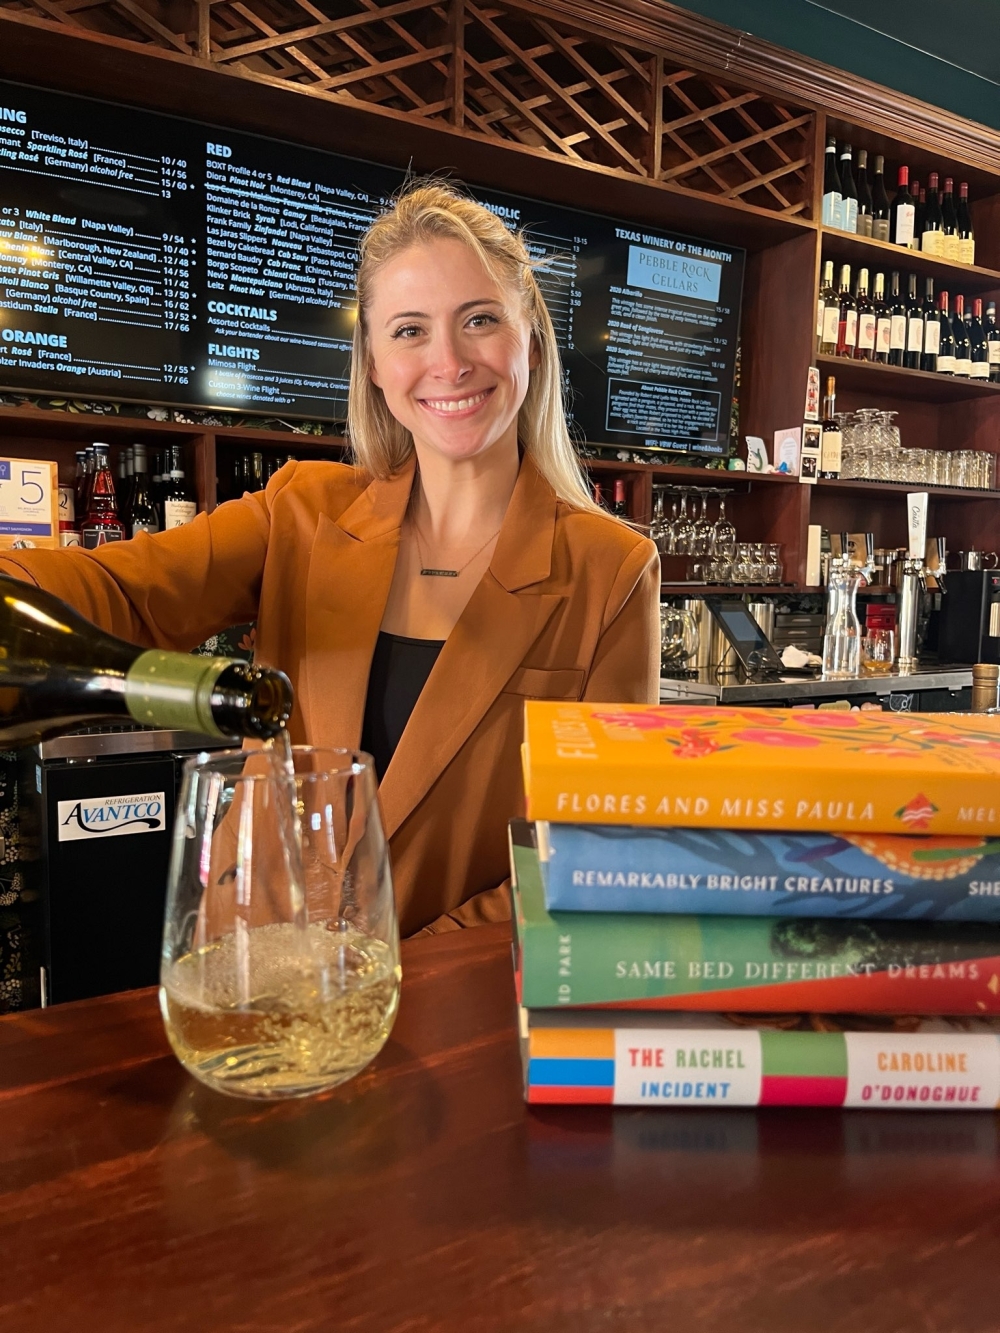 Jean Buckner said she always dreamed of opening a bookstore, so combing her love of books and wine made sense to her. (Courtesy Vintage)